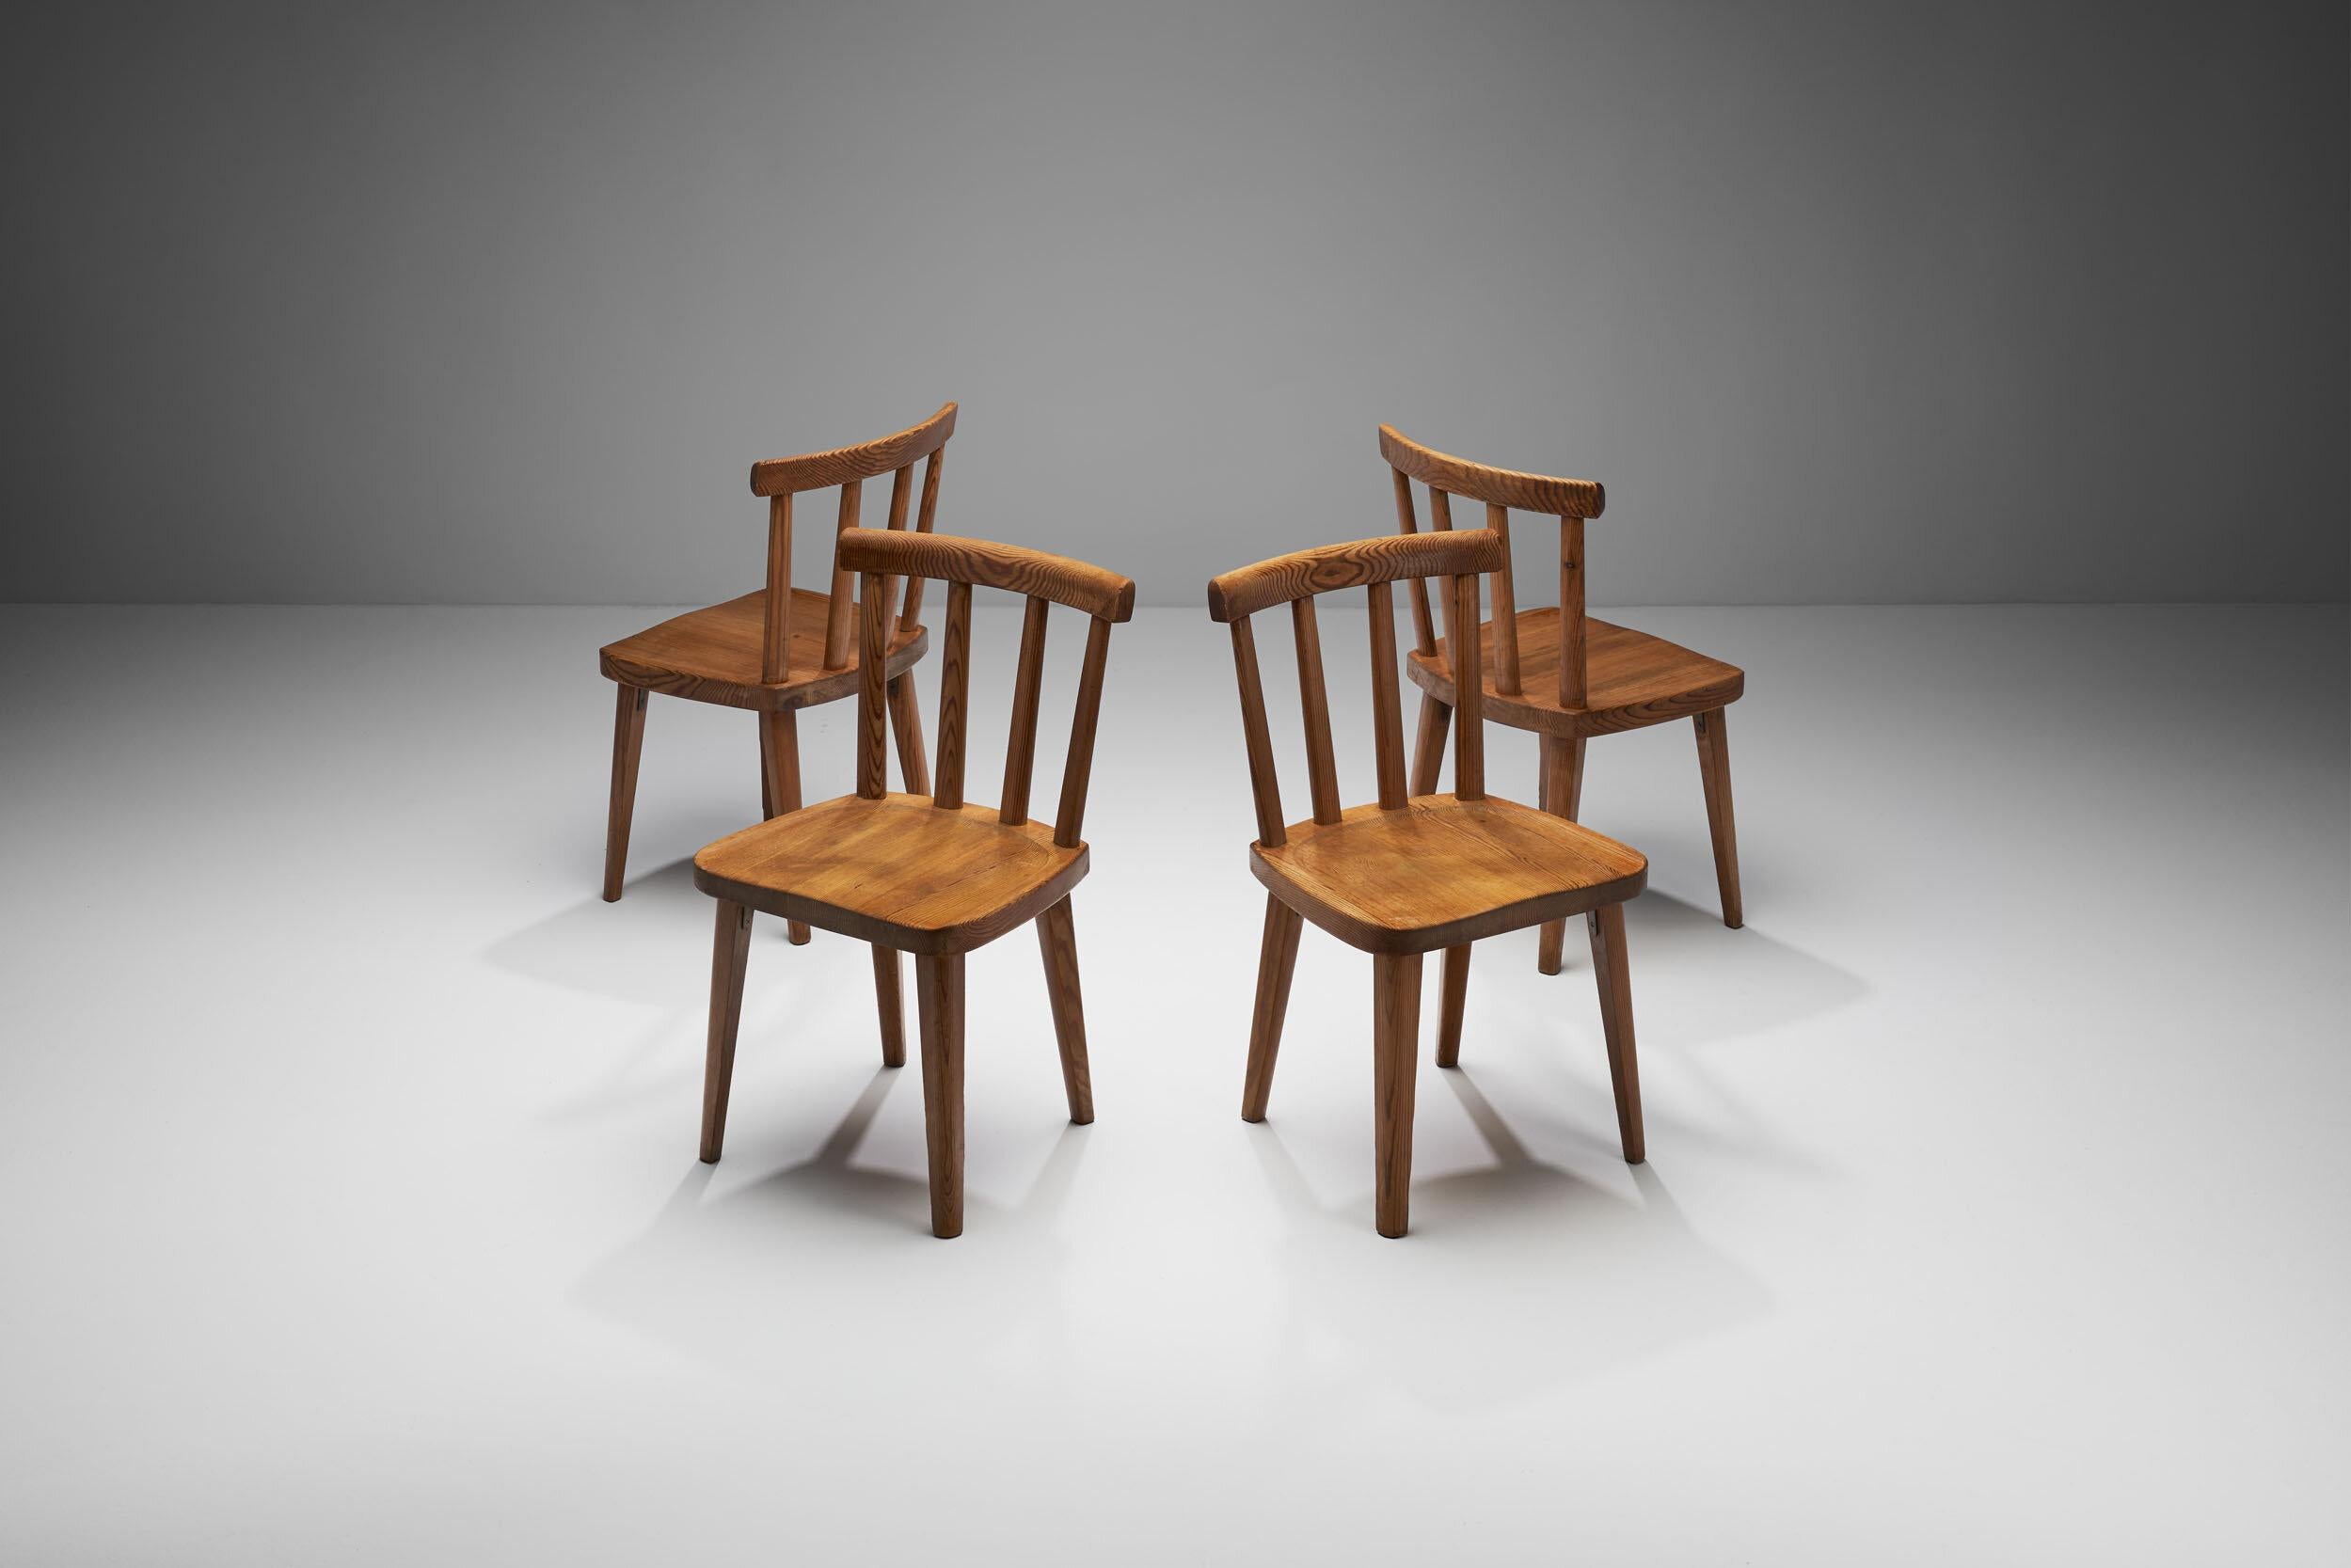 Four Axel Einar Hjorth Utö chairs, Sweden, 1930s

The ‘Utö’ chairs from Axel Hjorth Sportstugemöble furniture line consists of a simple composition made of pine that mixes the aesthetics of rural handicraft with international modernism. Produced by